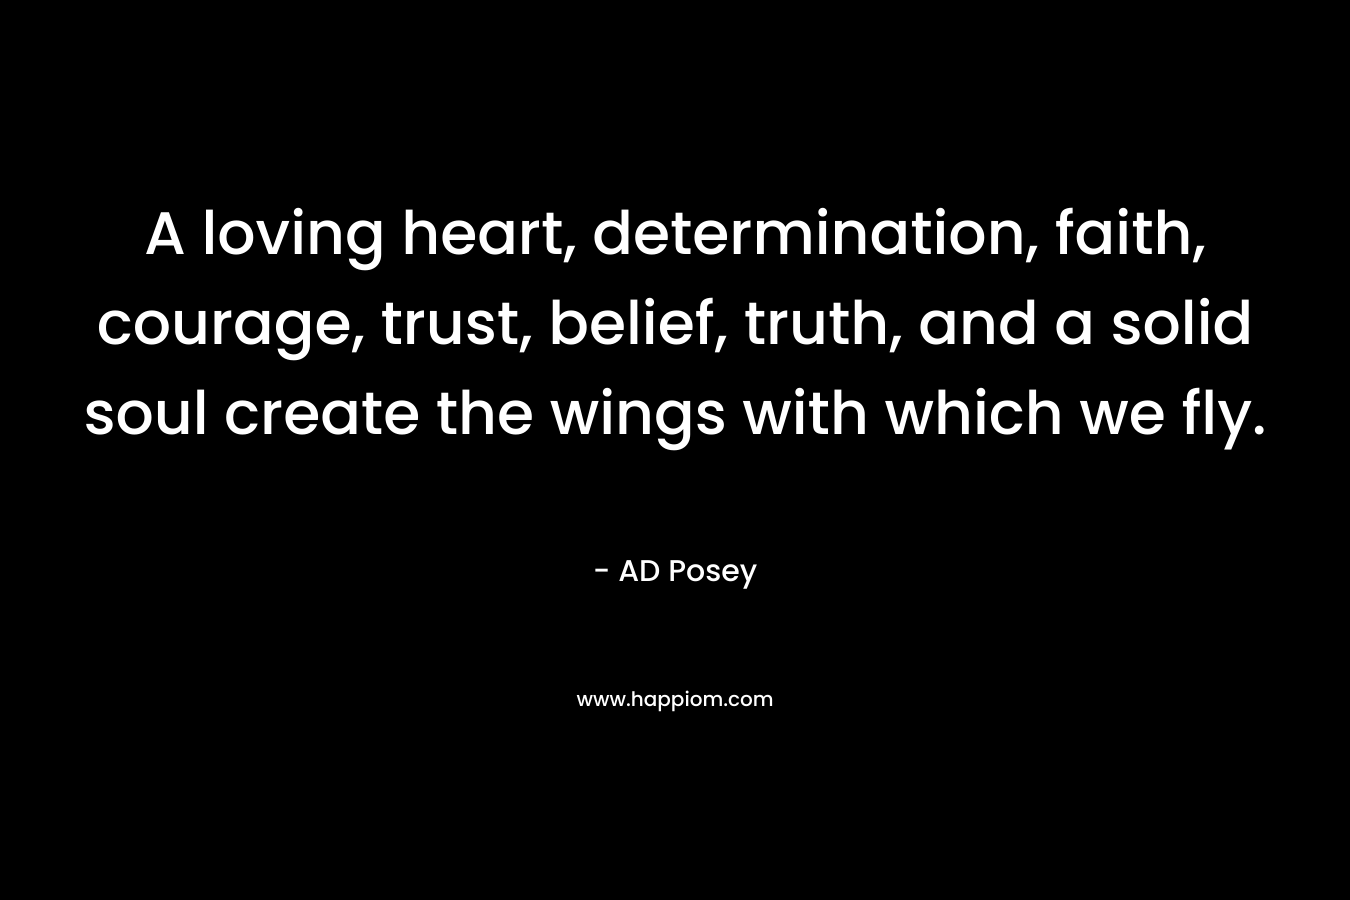 A loving heart, determination, faith, courage, trust, belief, truth, and a solid soul create the wings with which we fly.